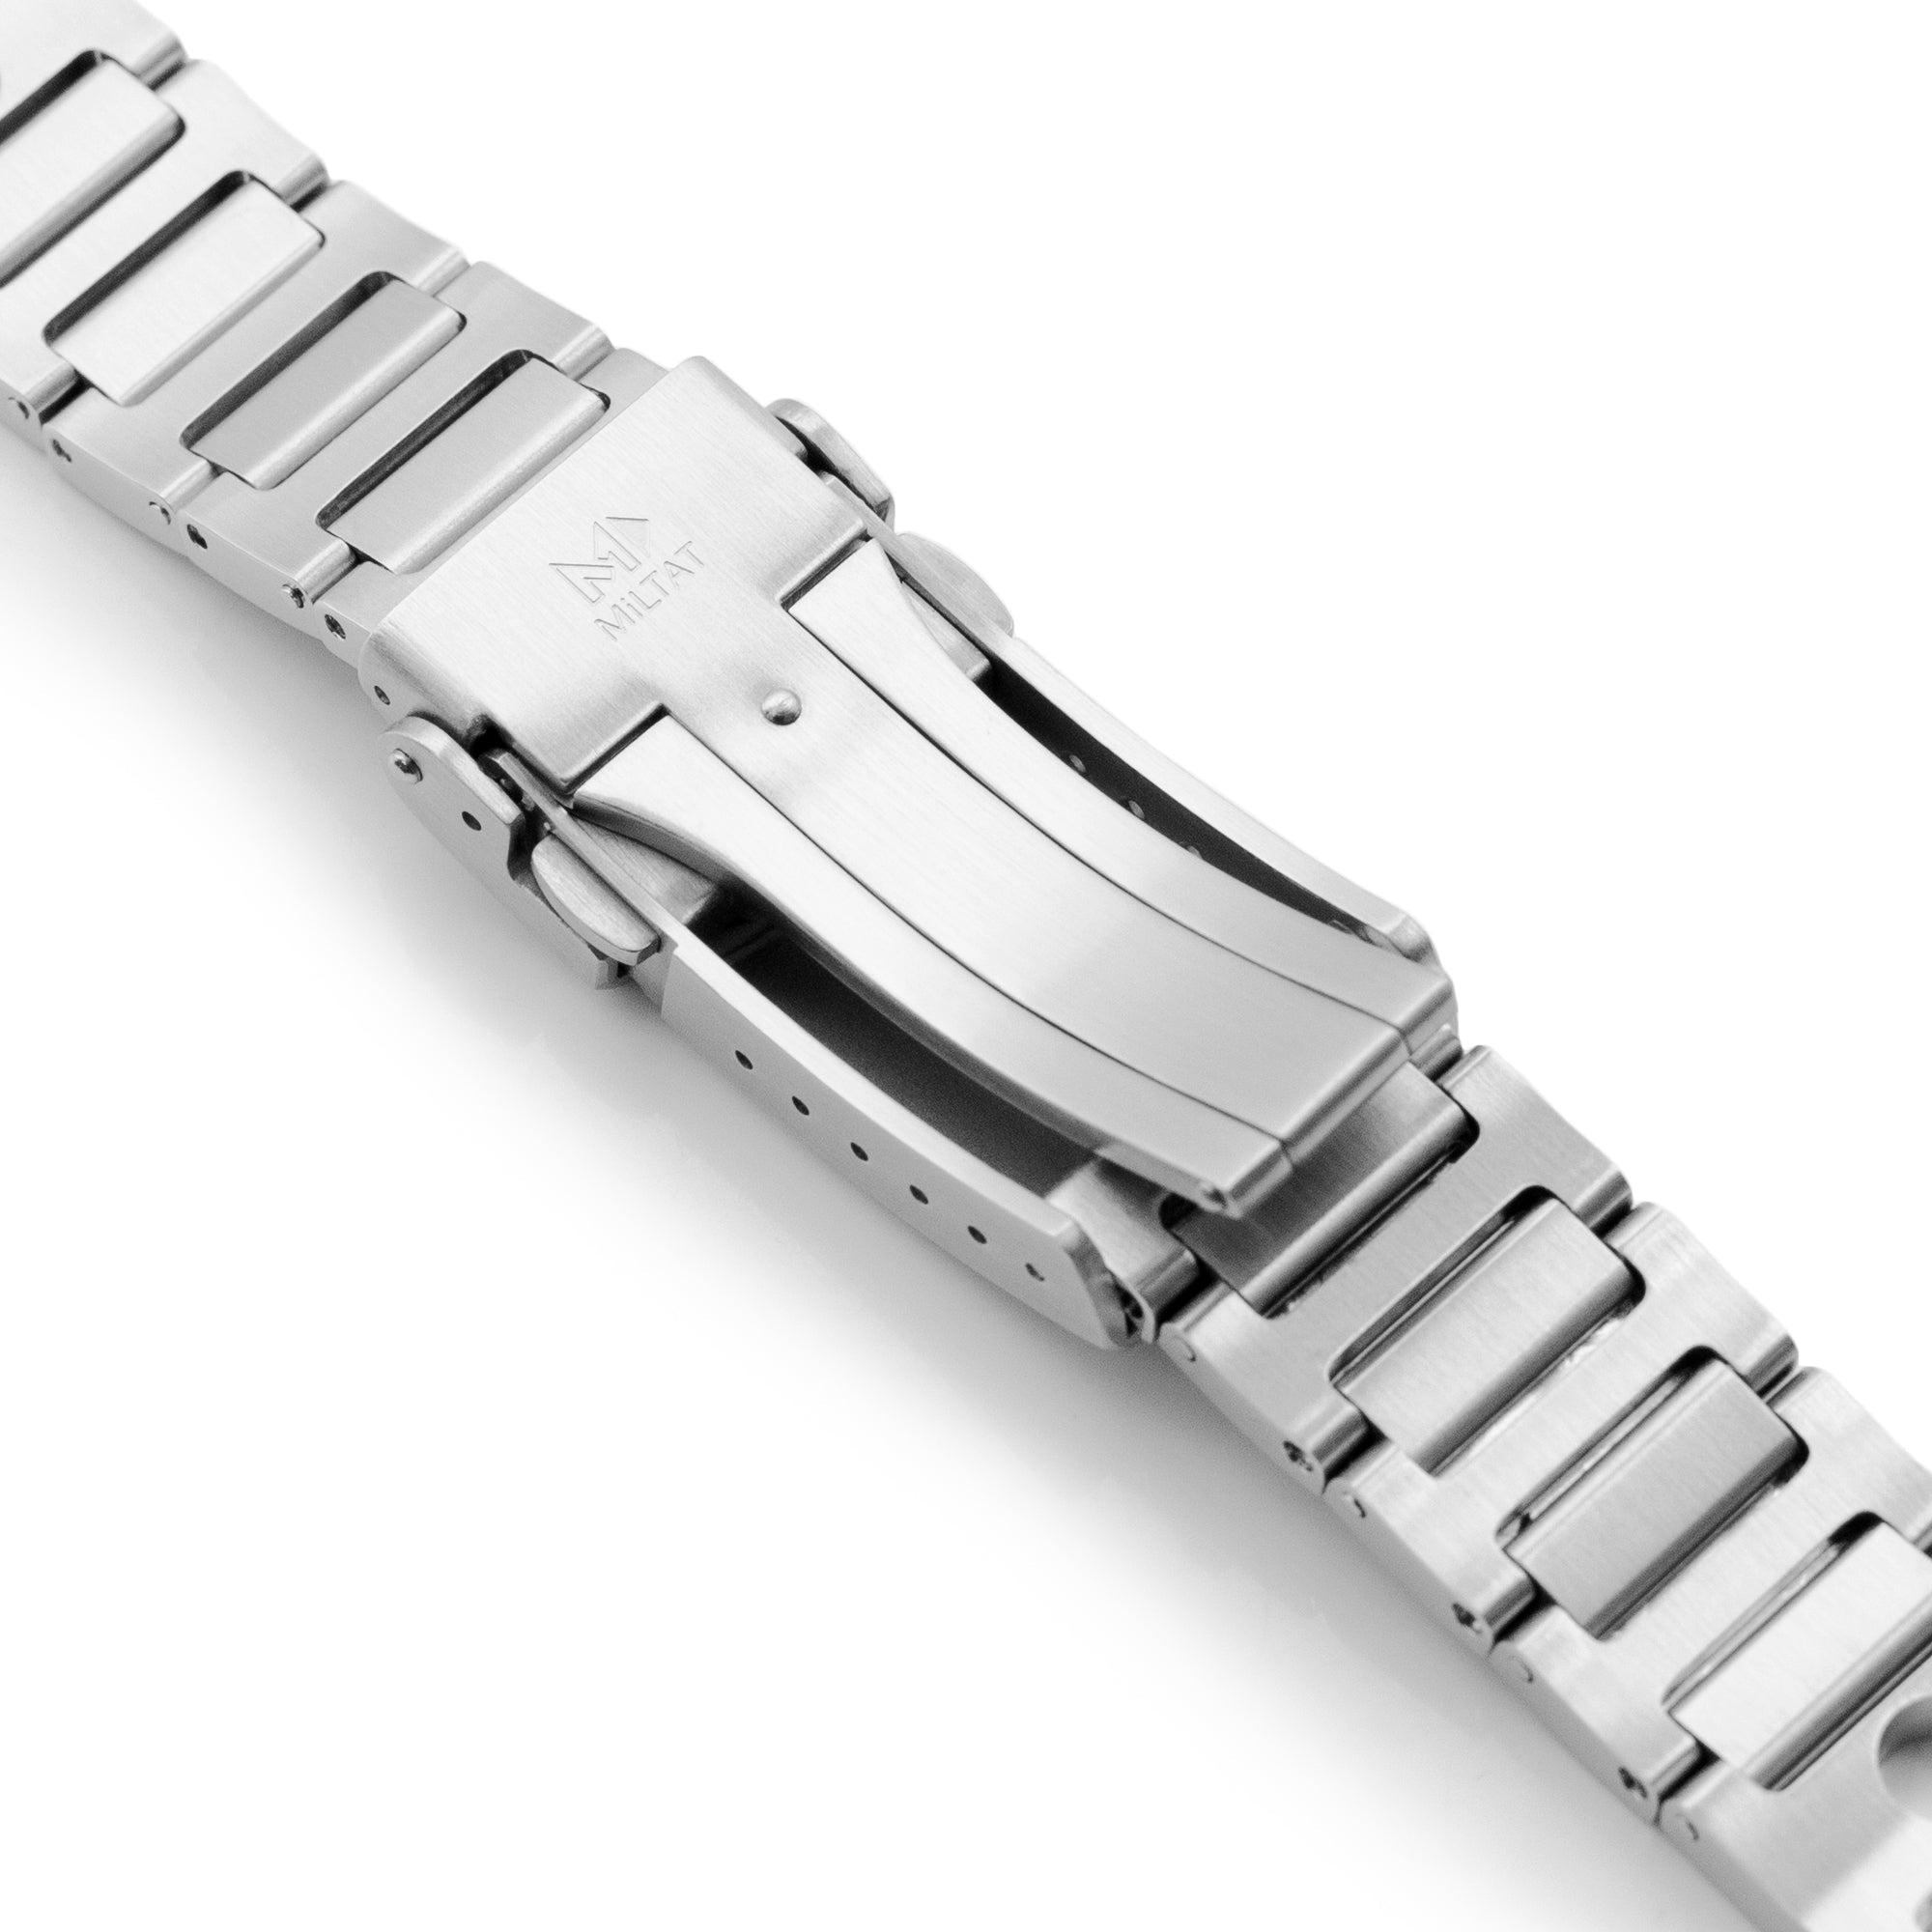 20mm Rollball version II Watch Band for Seiko SSC813P1, 316L Stainless Steel Brushed V-Clasp Strapcode Watch Bands